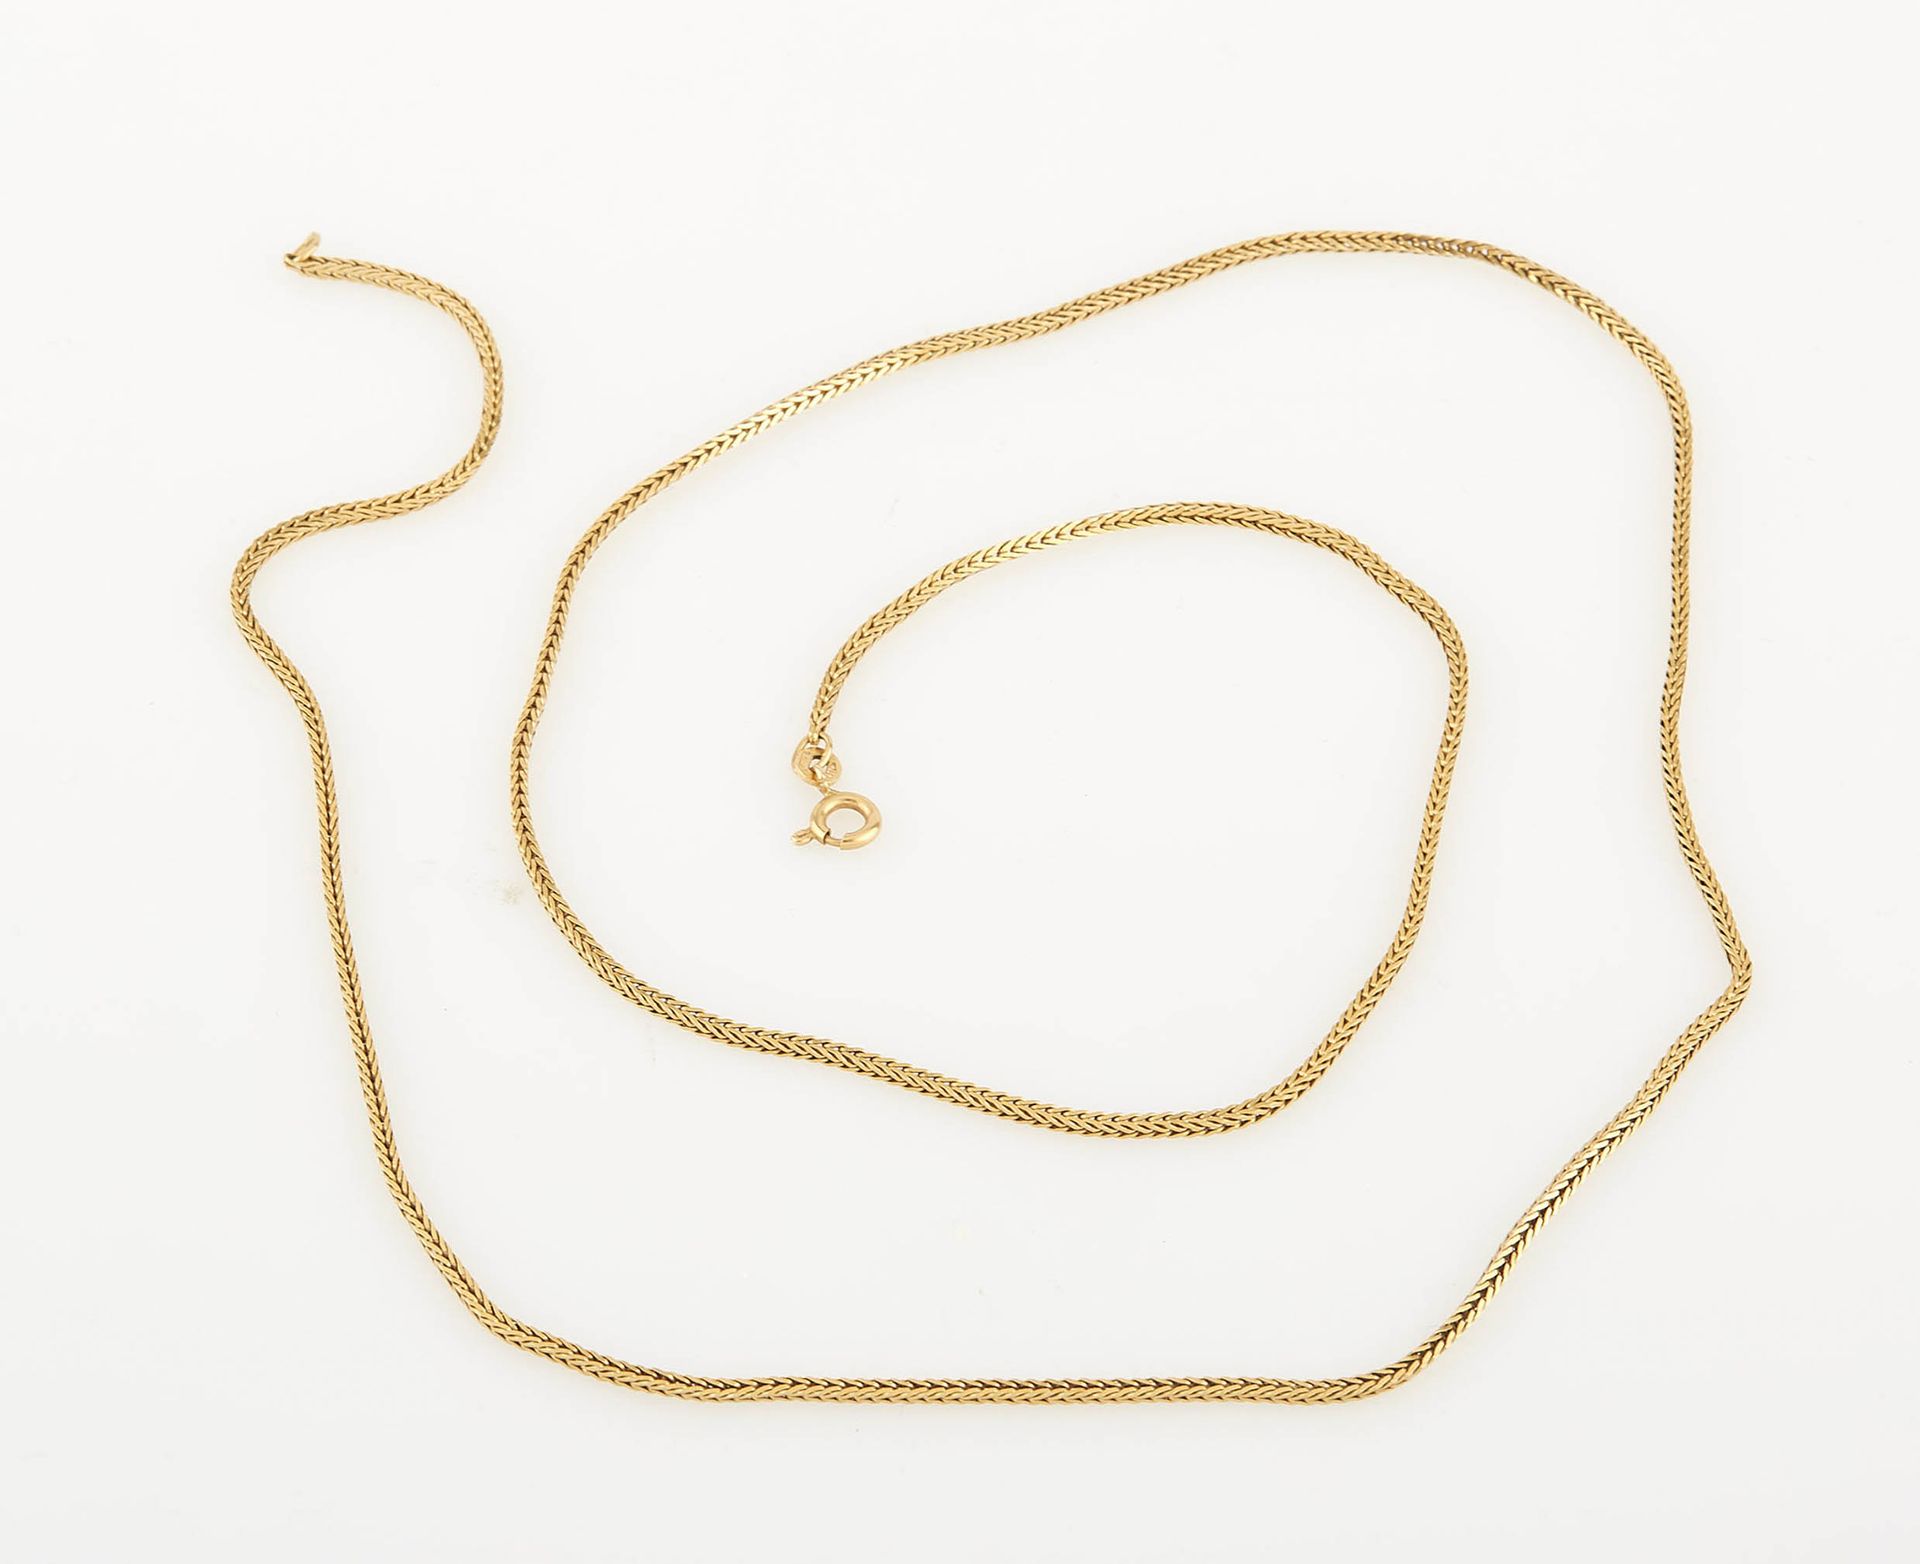 Null Yellow gold chain with Venetian stitch. Length : 70 cm. Weight : 12,60 g.